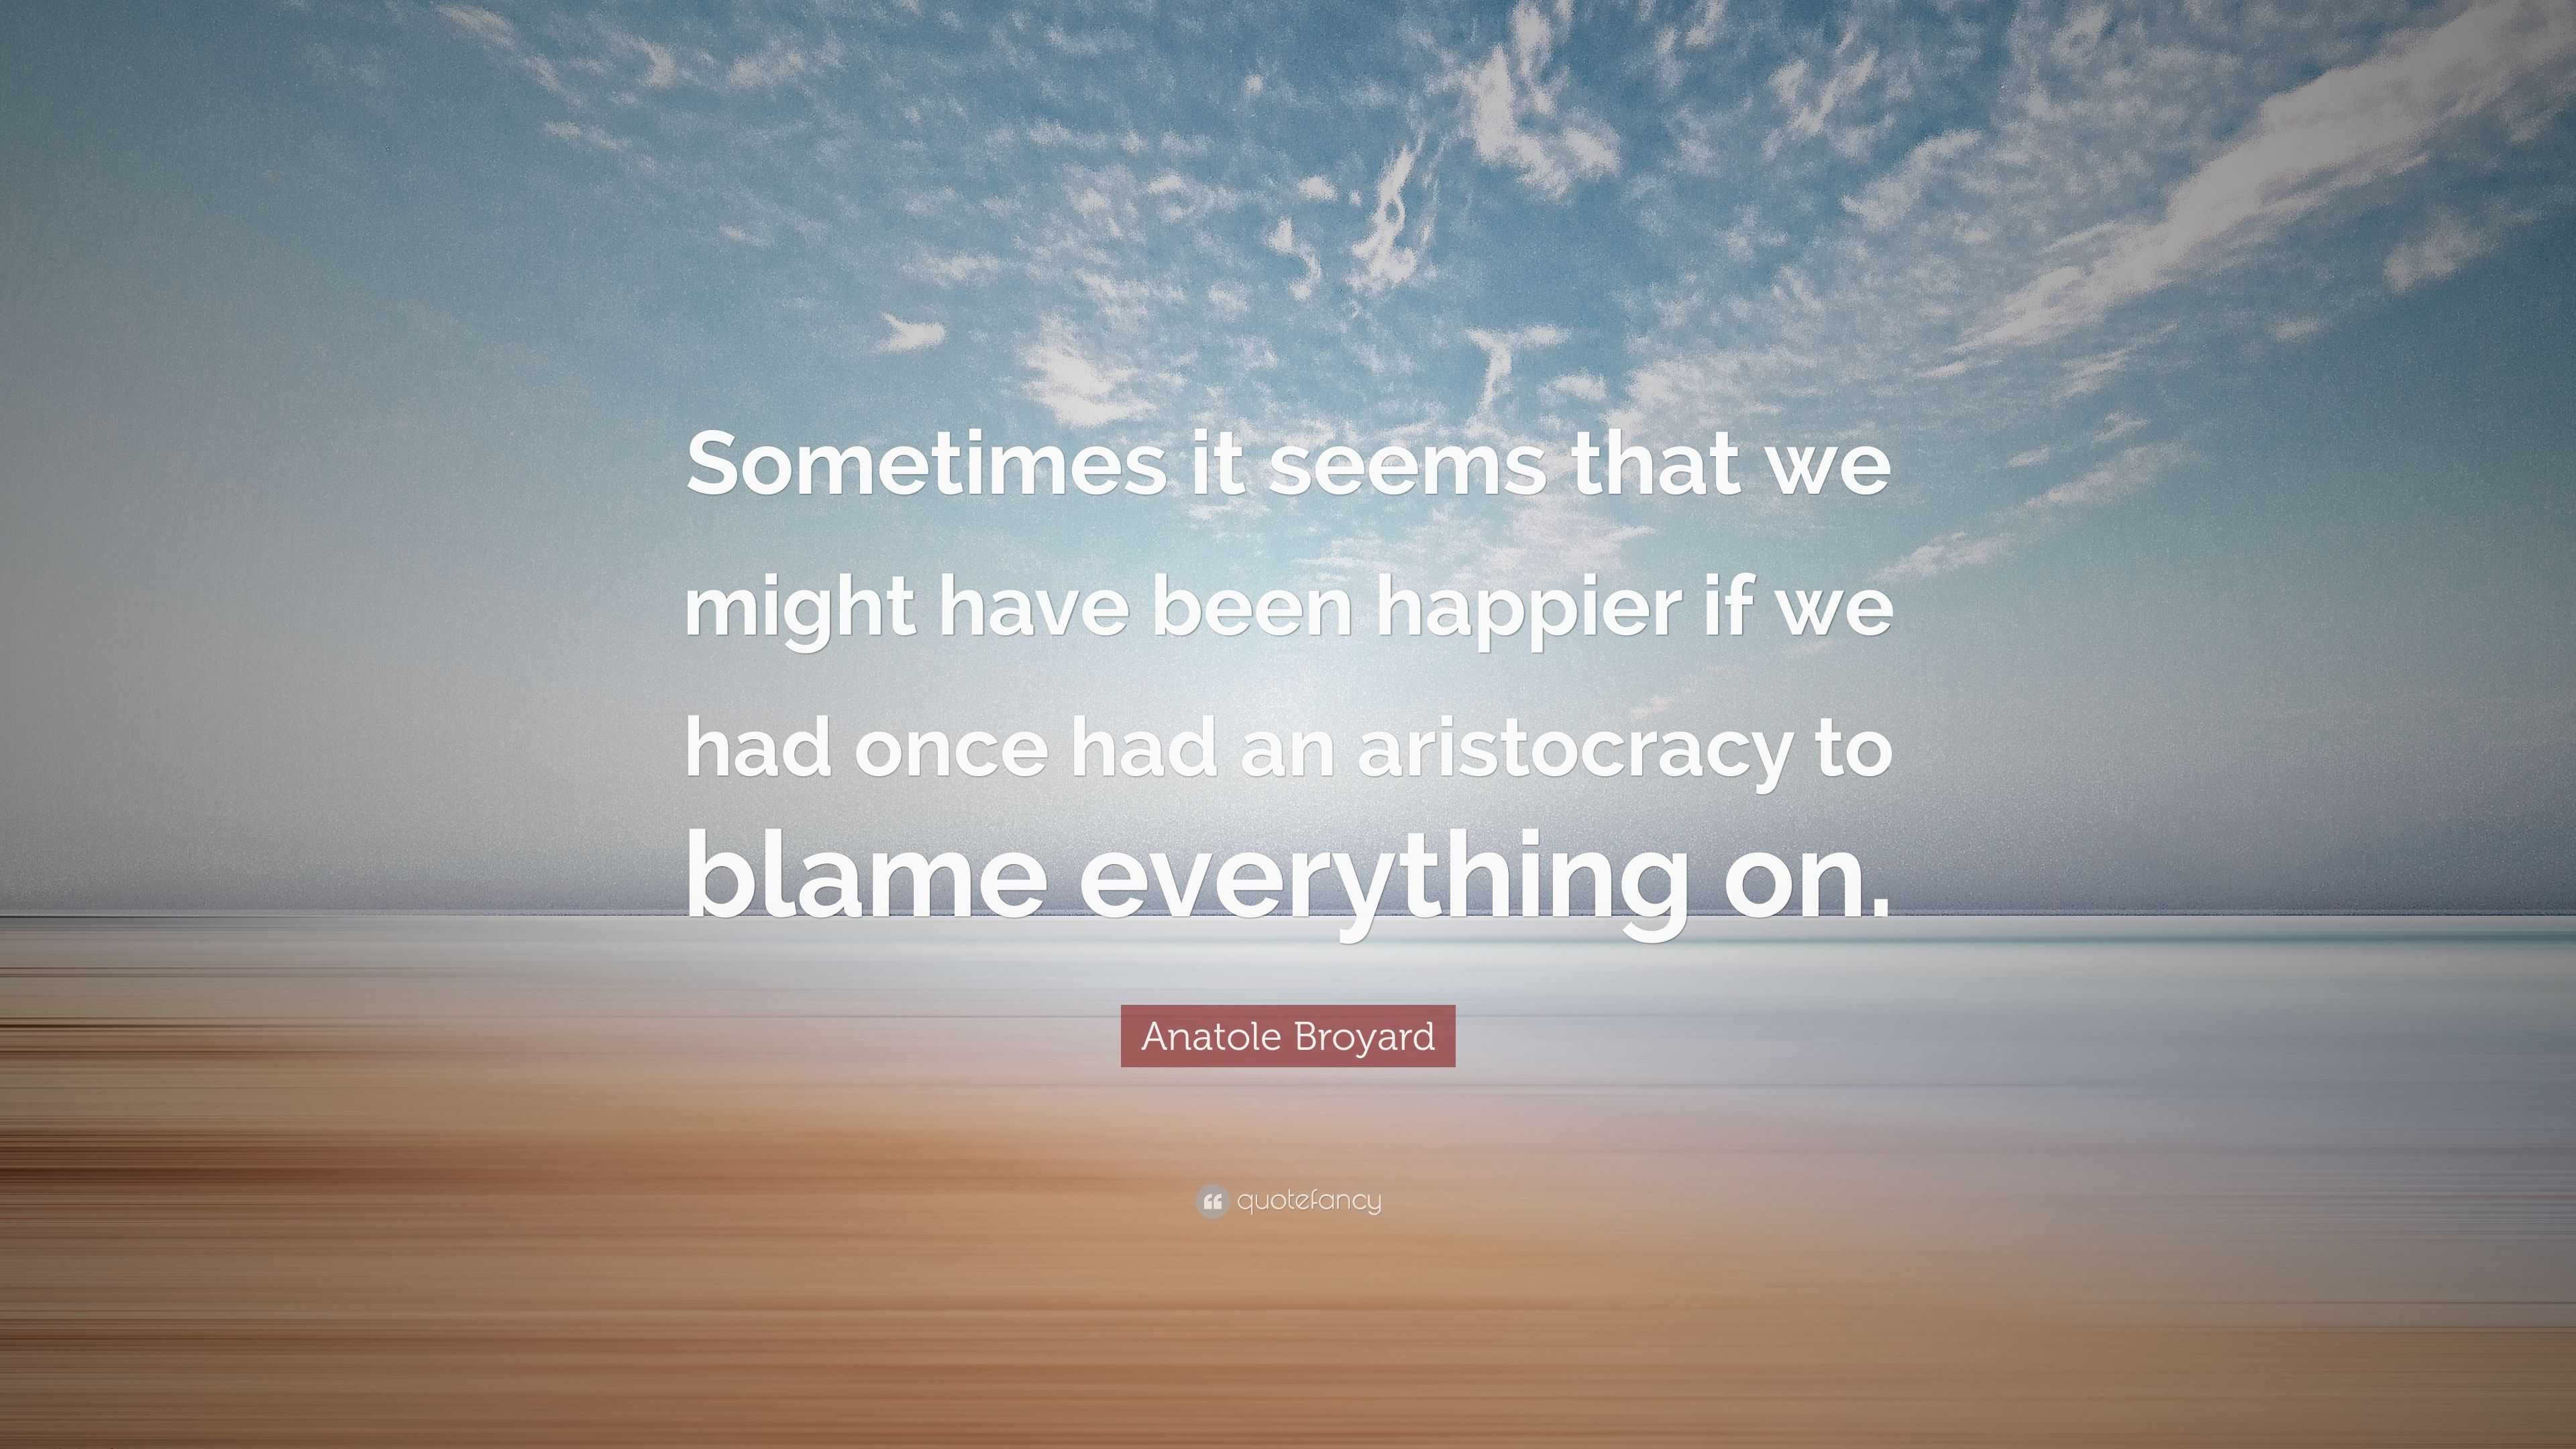 Anatole Broyard Quote: “Sometimes it seems that we might have been ...